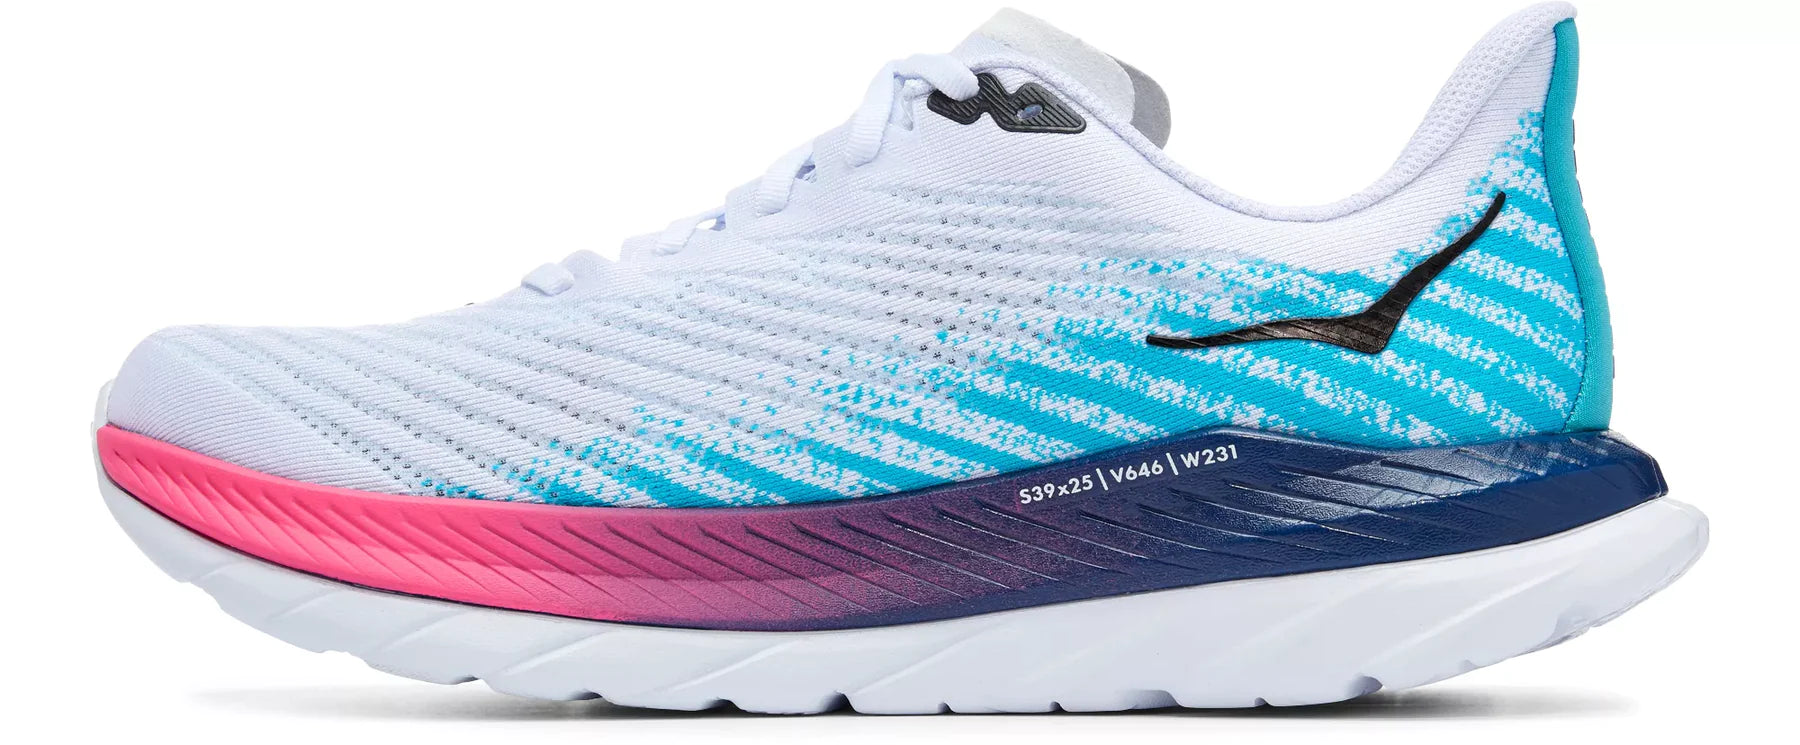 Medial view of the Men's HOKA Mach 5 in the color White / Scuba